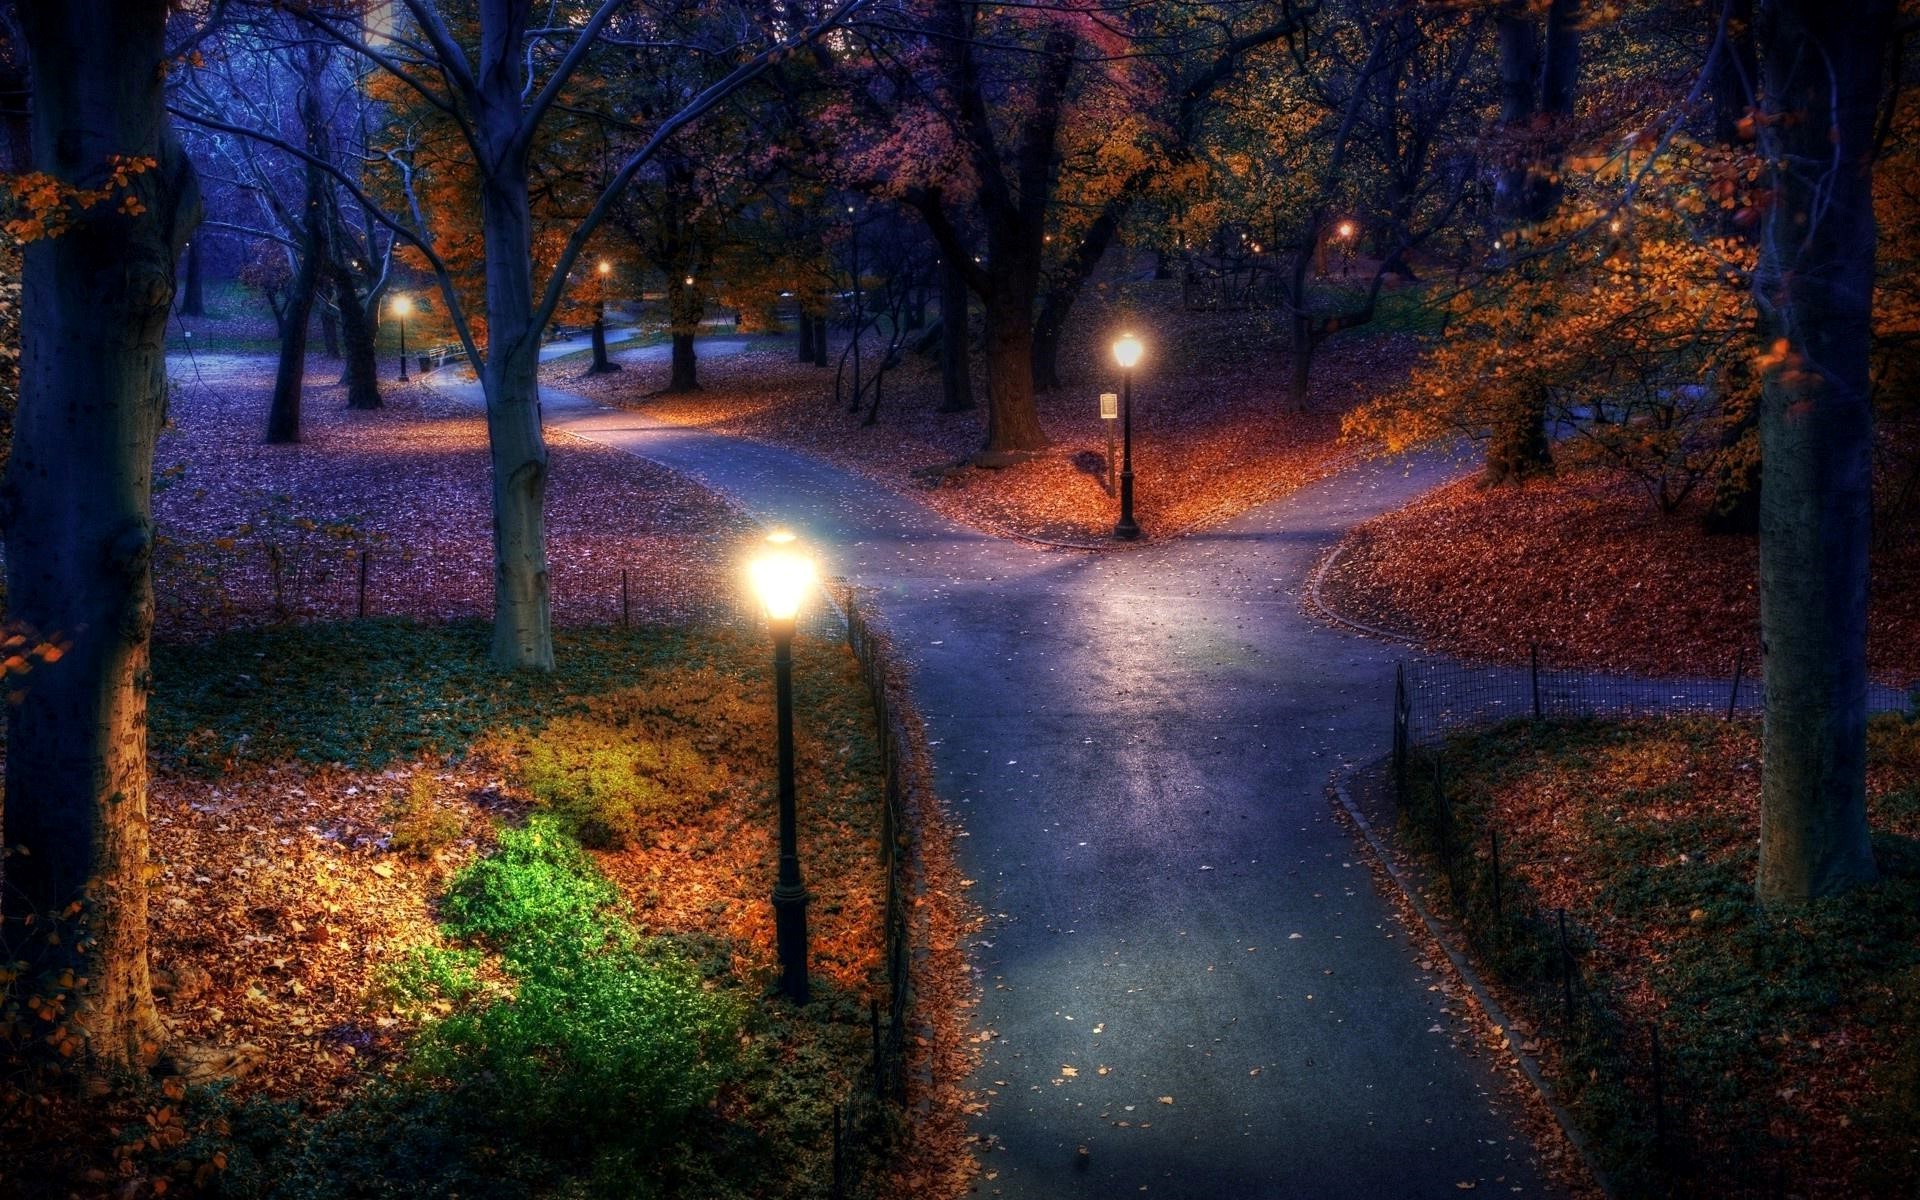 Nature Night View Look - Central Park Autumn Nights - HD Wallpaper 